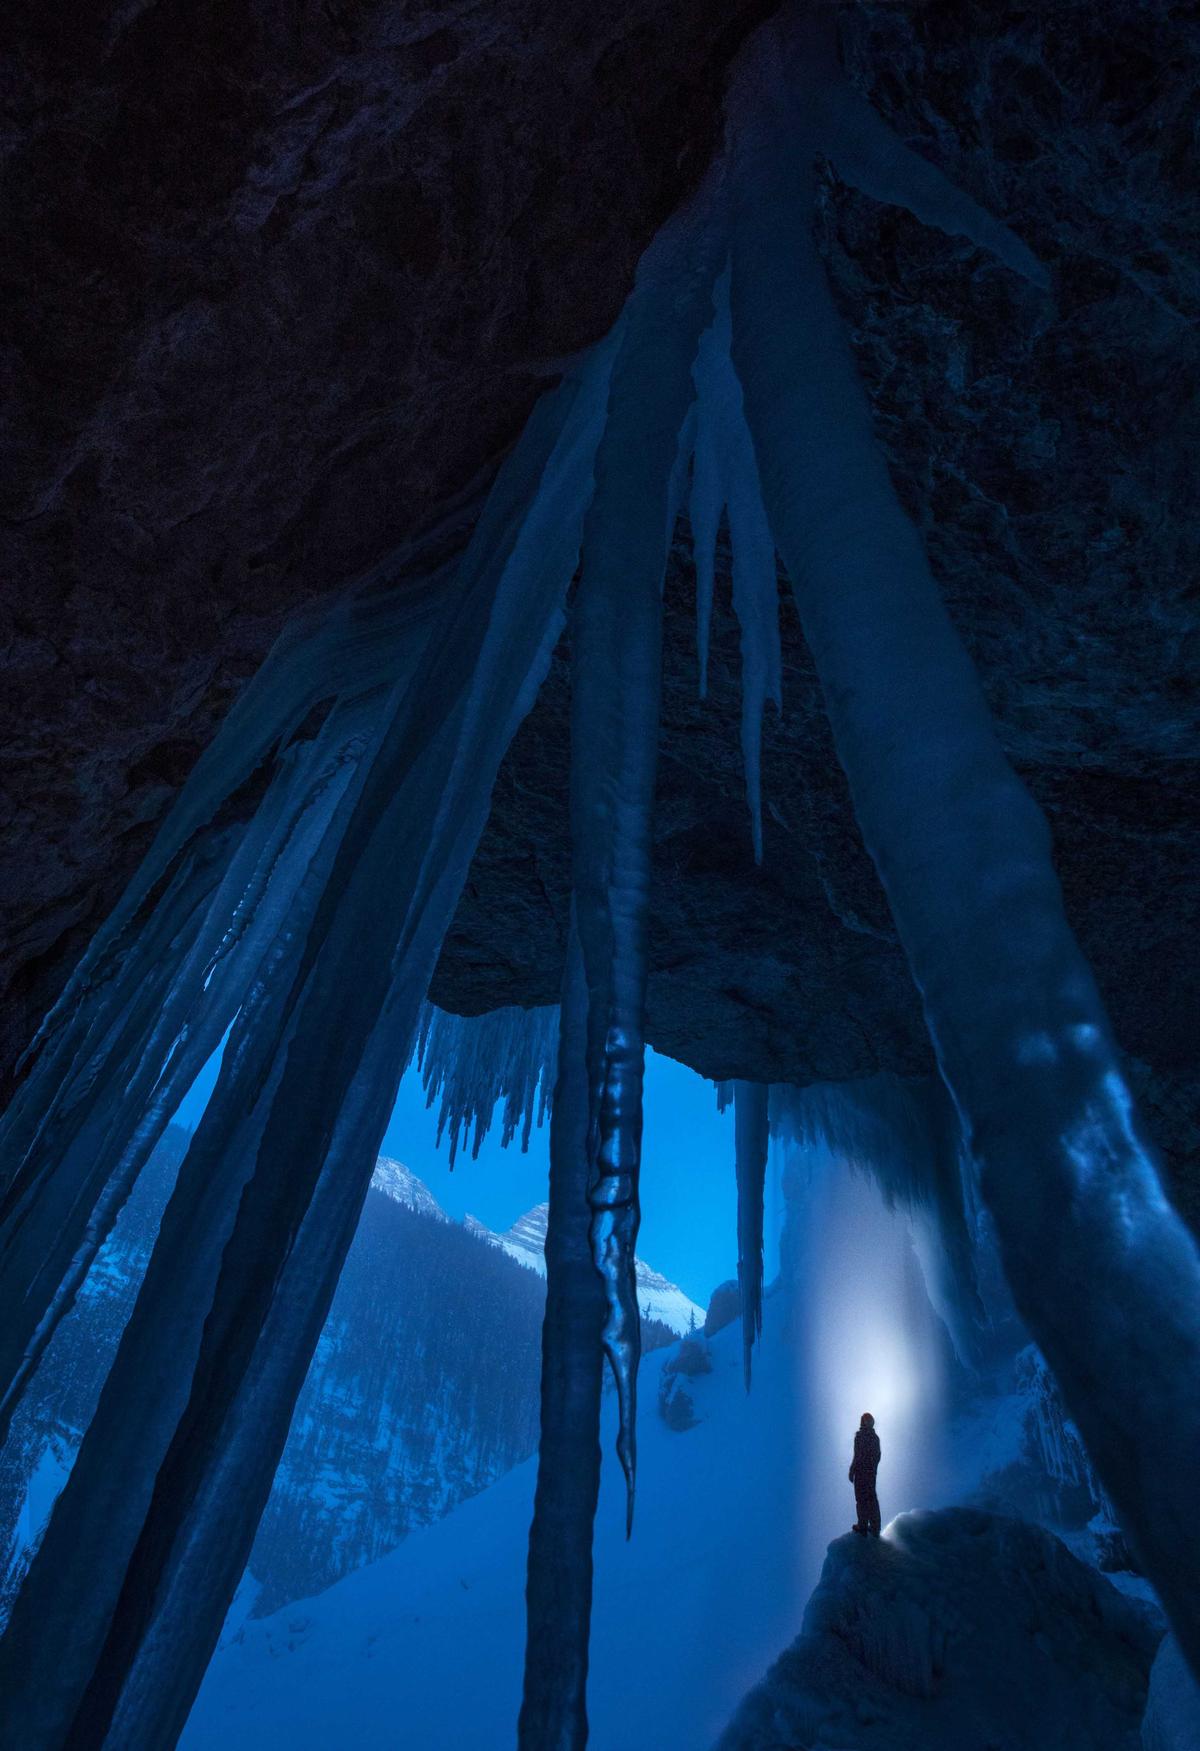 A self portarit of Paul Zizka at Panther Falls in Banff, Canada (Caters News)